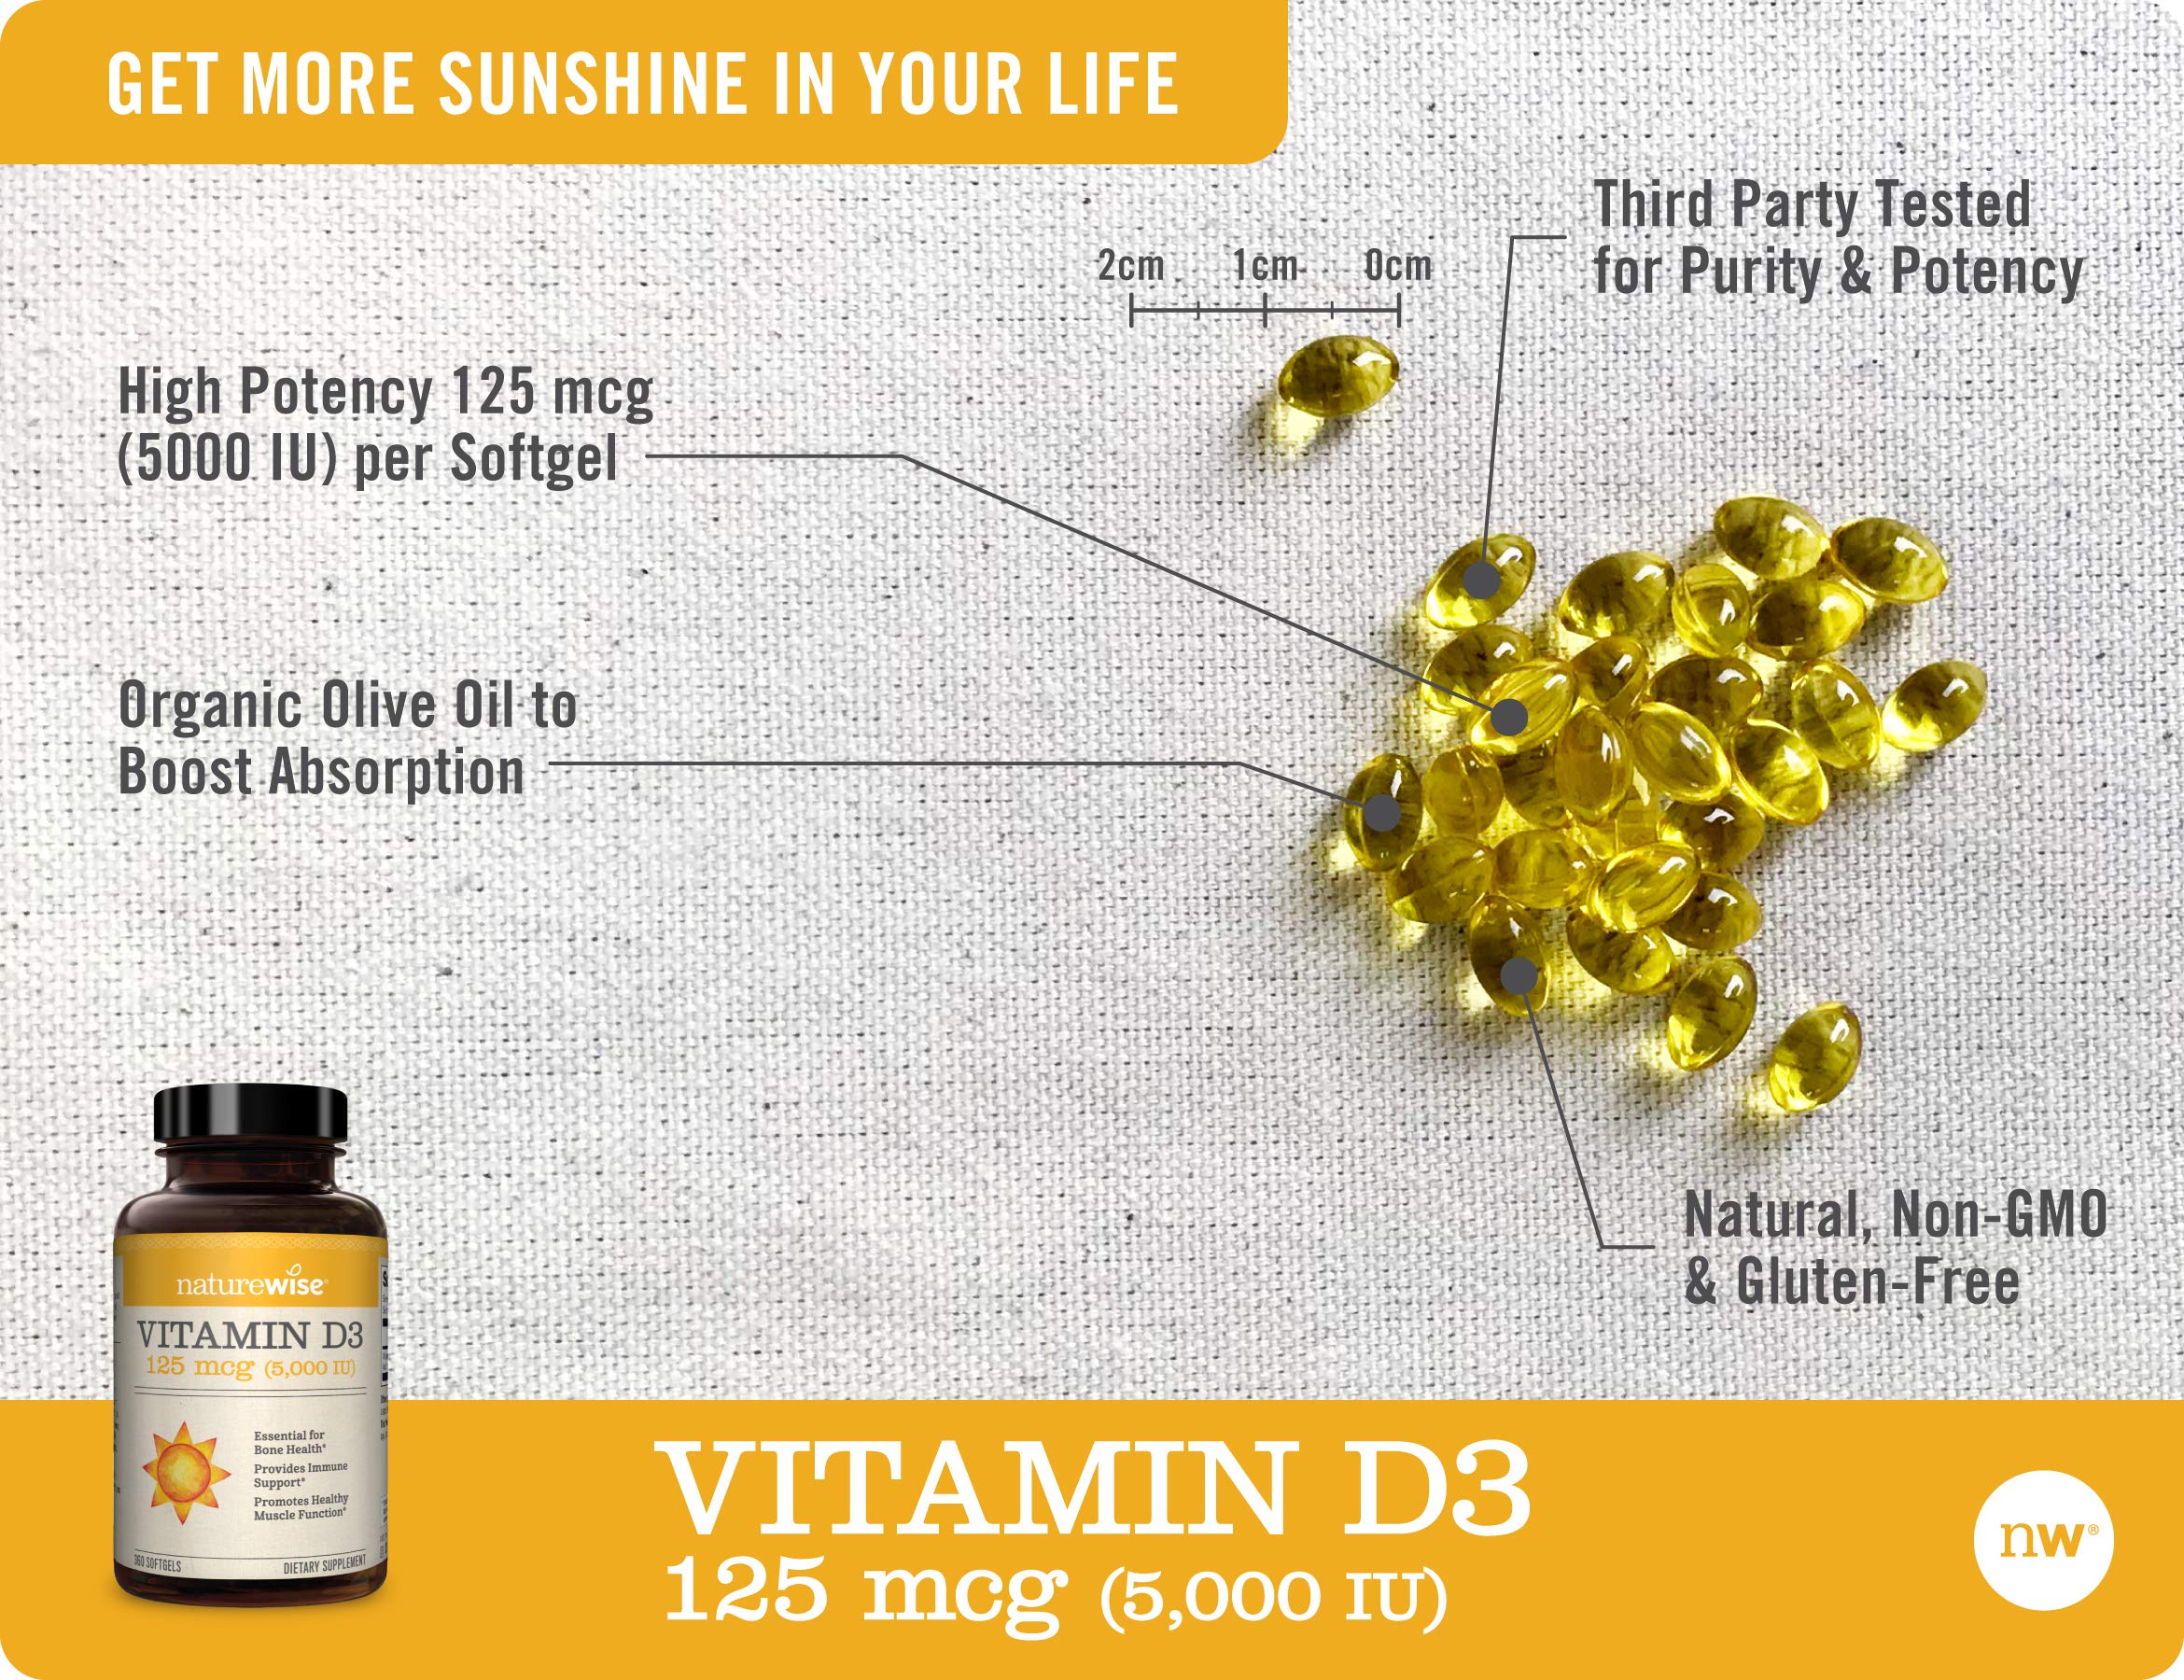 NatureWise Vitamin D3 5000iu (125 mcg) 1 Year Supply for Healthy Muscle Function Enhanced Collagen Peptides (45 Servings) - Hydrolyzed Type I & III